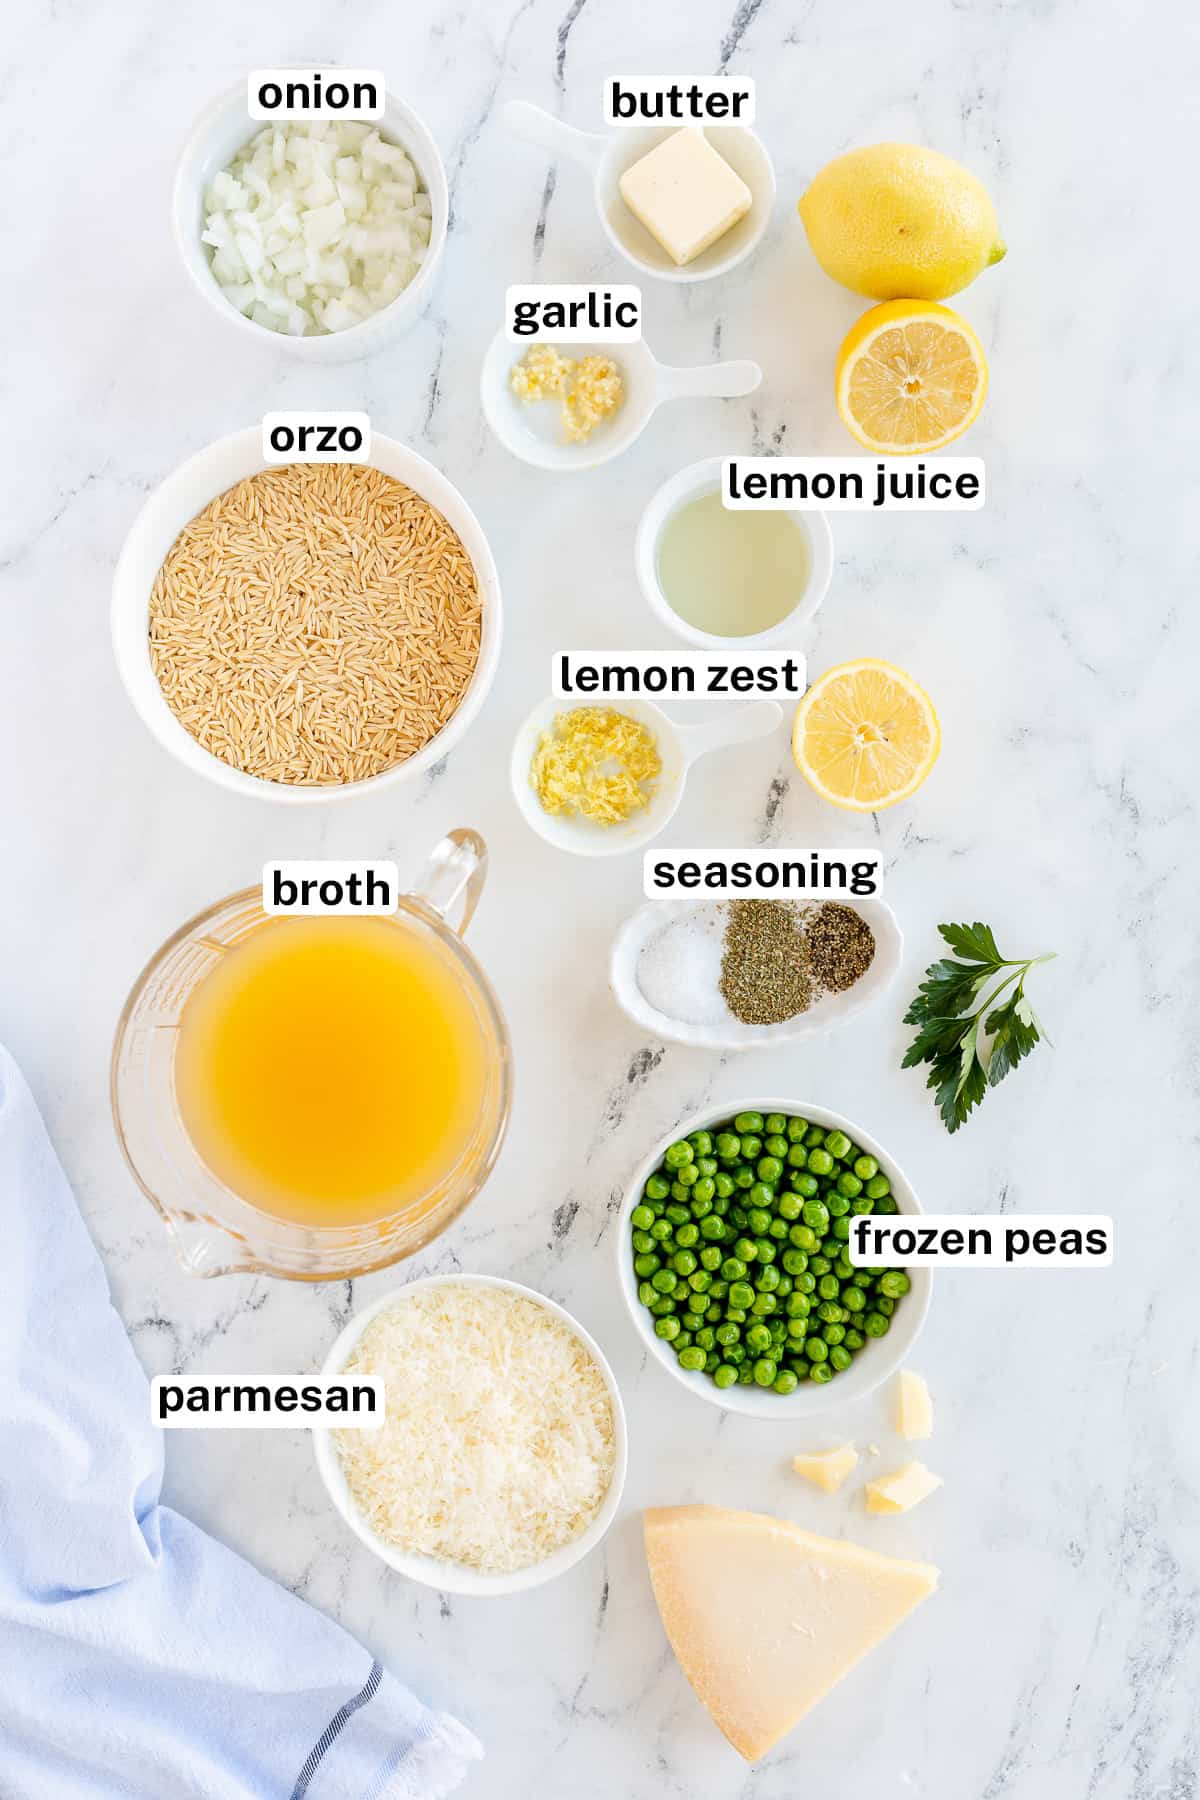 Ingredients for Orzo with Peas and Parmesan with text.